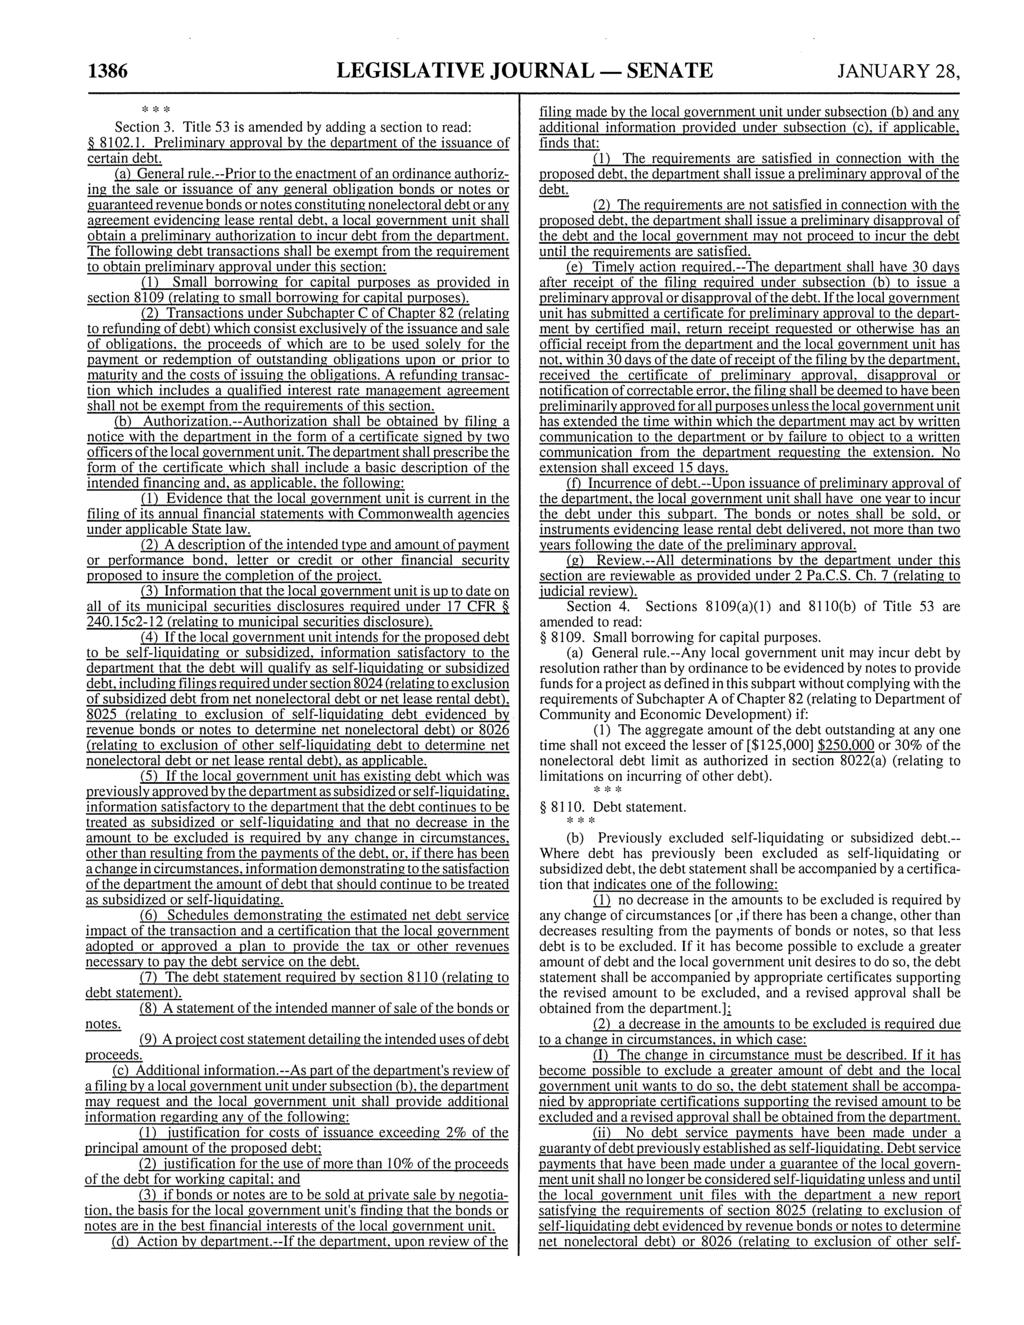 1386 LEGISLATIVE JOURNAL - SENATE JANUARY 28, * * Section 3. Title 53 is amended by adding a section to read: 8102.1. Preliminary approval by the department of the issuance of certain debt.